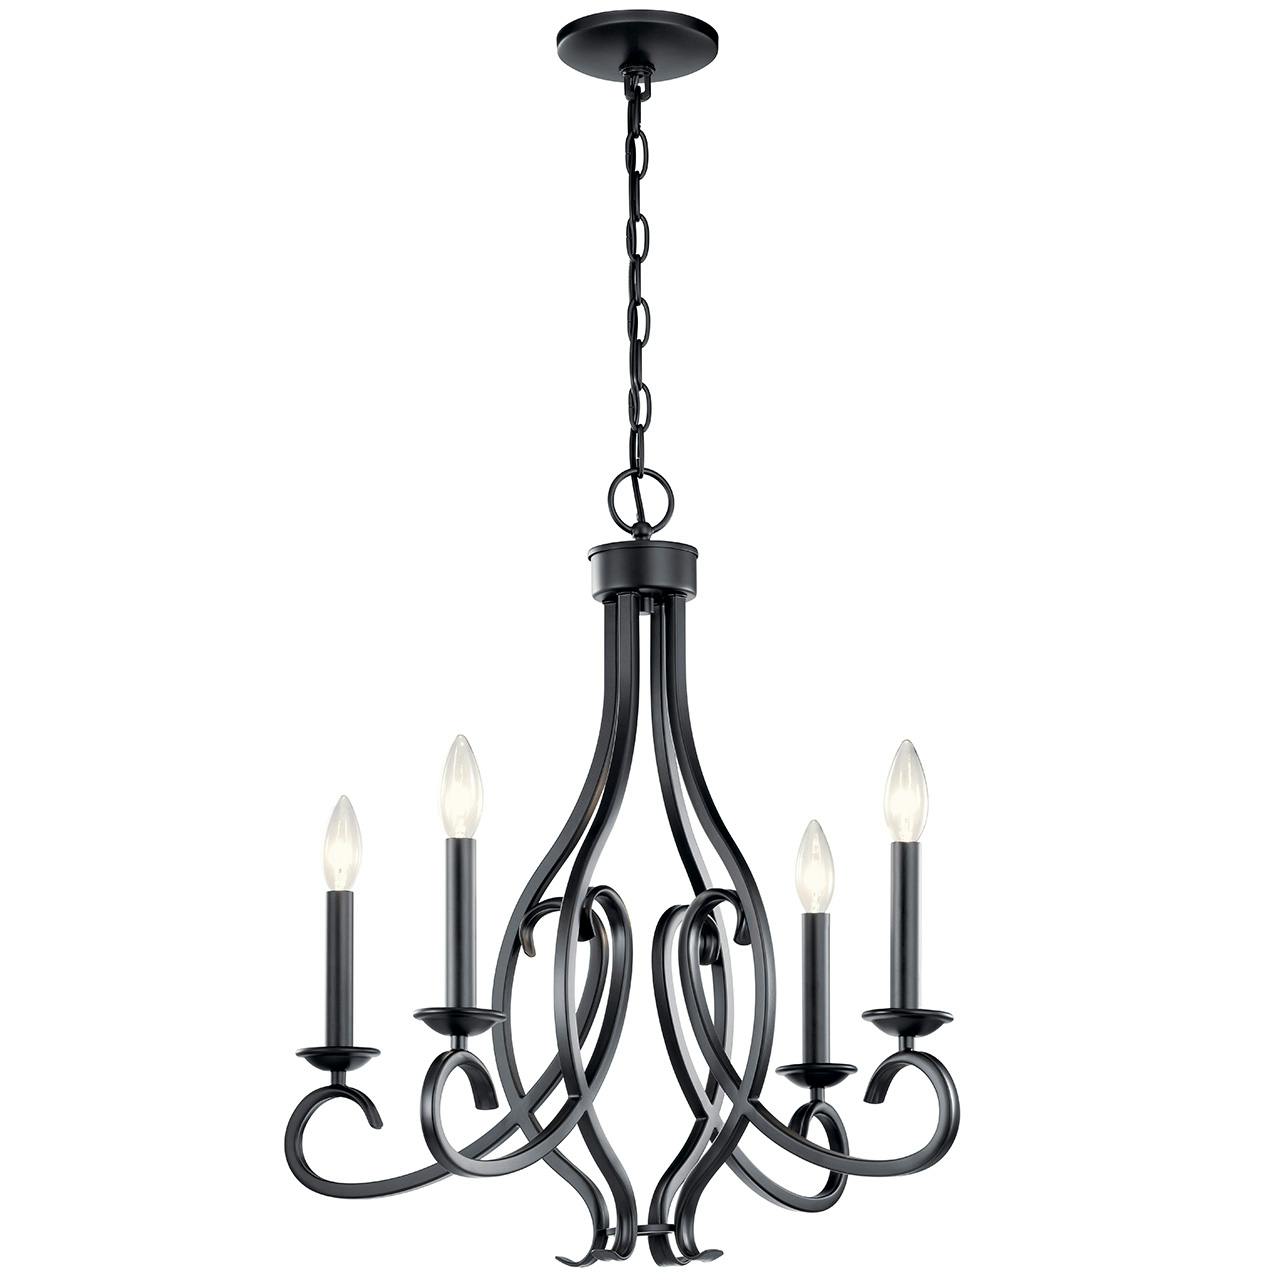 Ania 4 Light Chandelier in Black on a white background